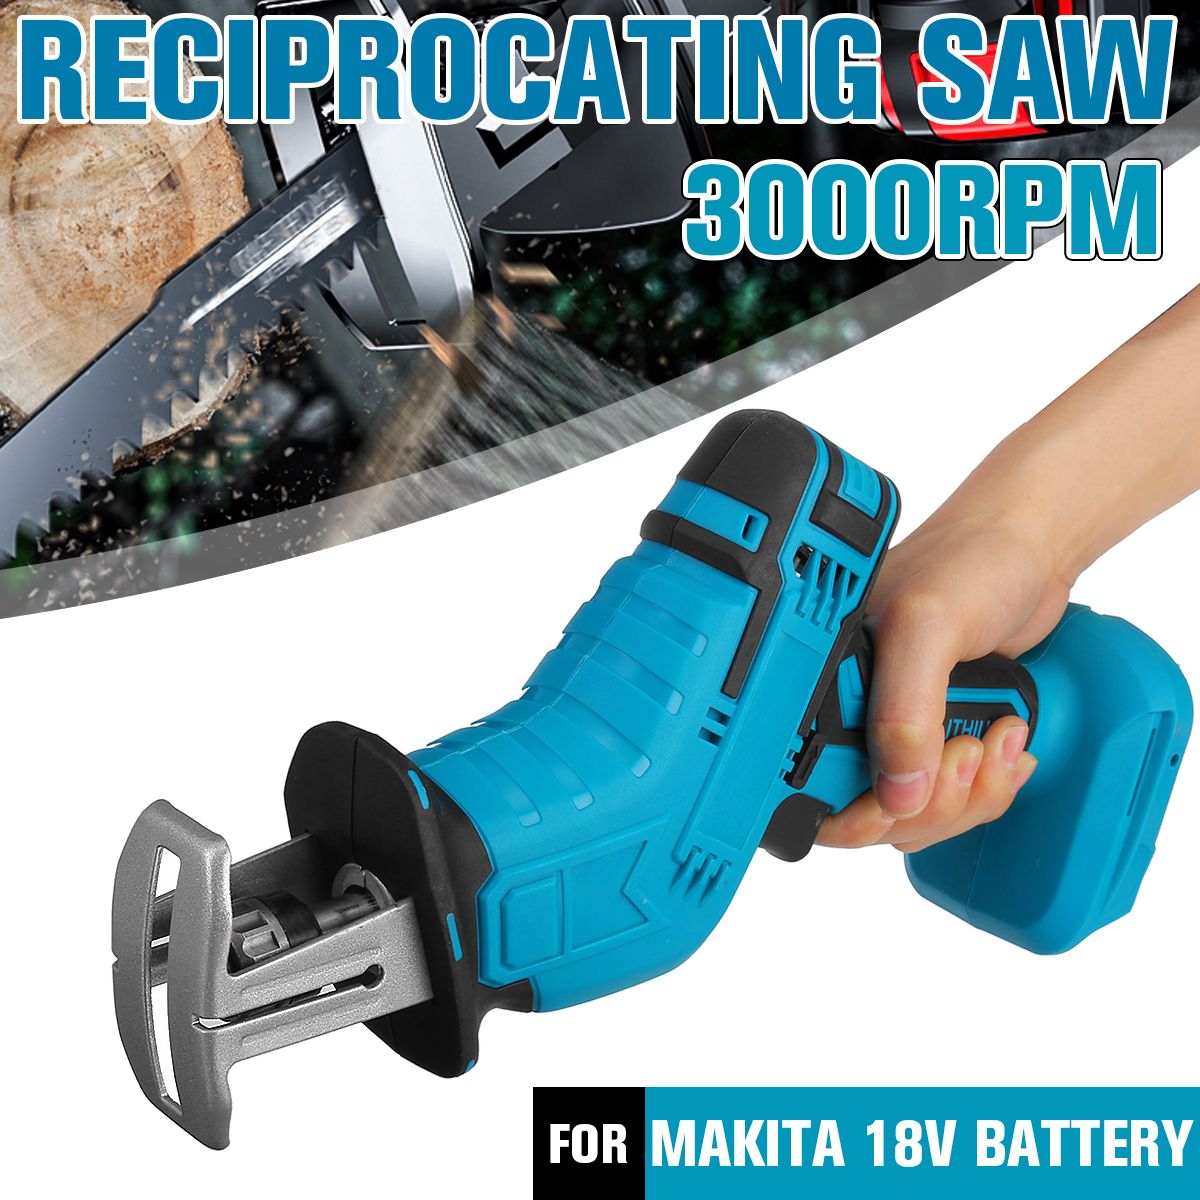 10mm-Cordless-Reciprocating-Saw-3000rpm-Saw-Replacement-Variable-Speed-For-Makita-18V-Battery-1673434